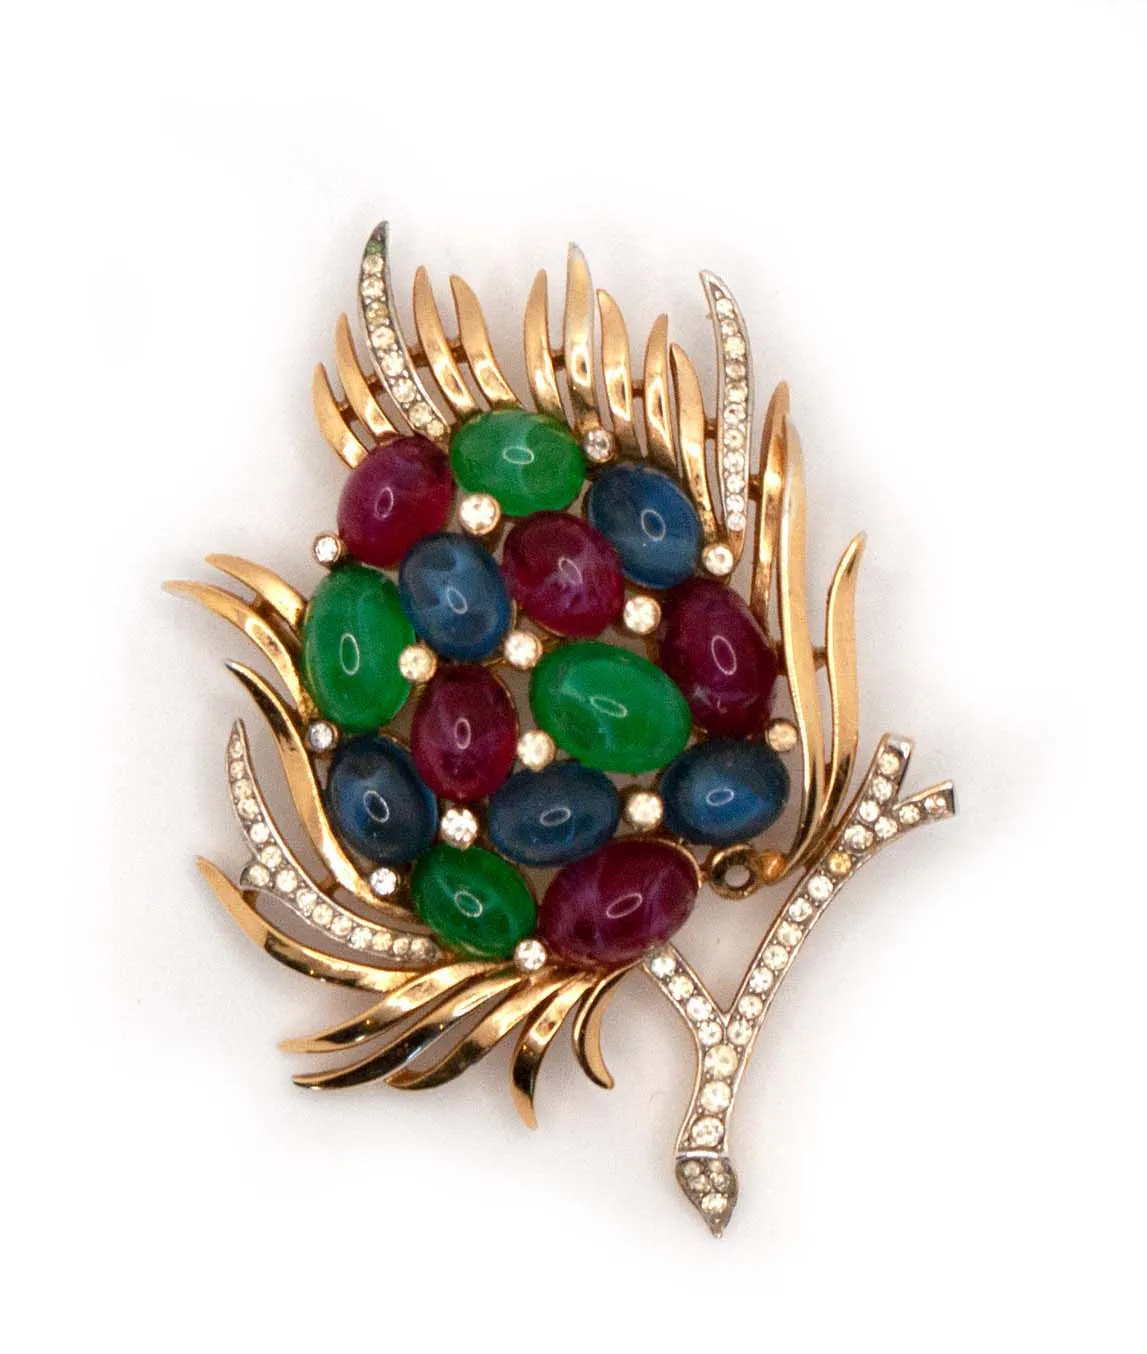 Trifari Jewels of India brooch red blue green and gold